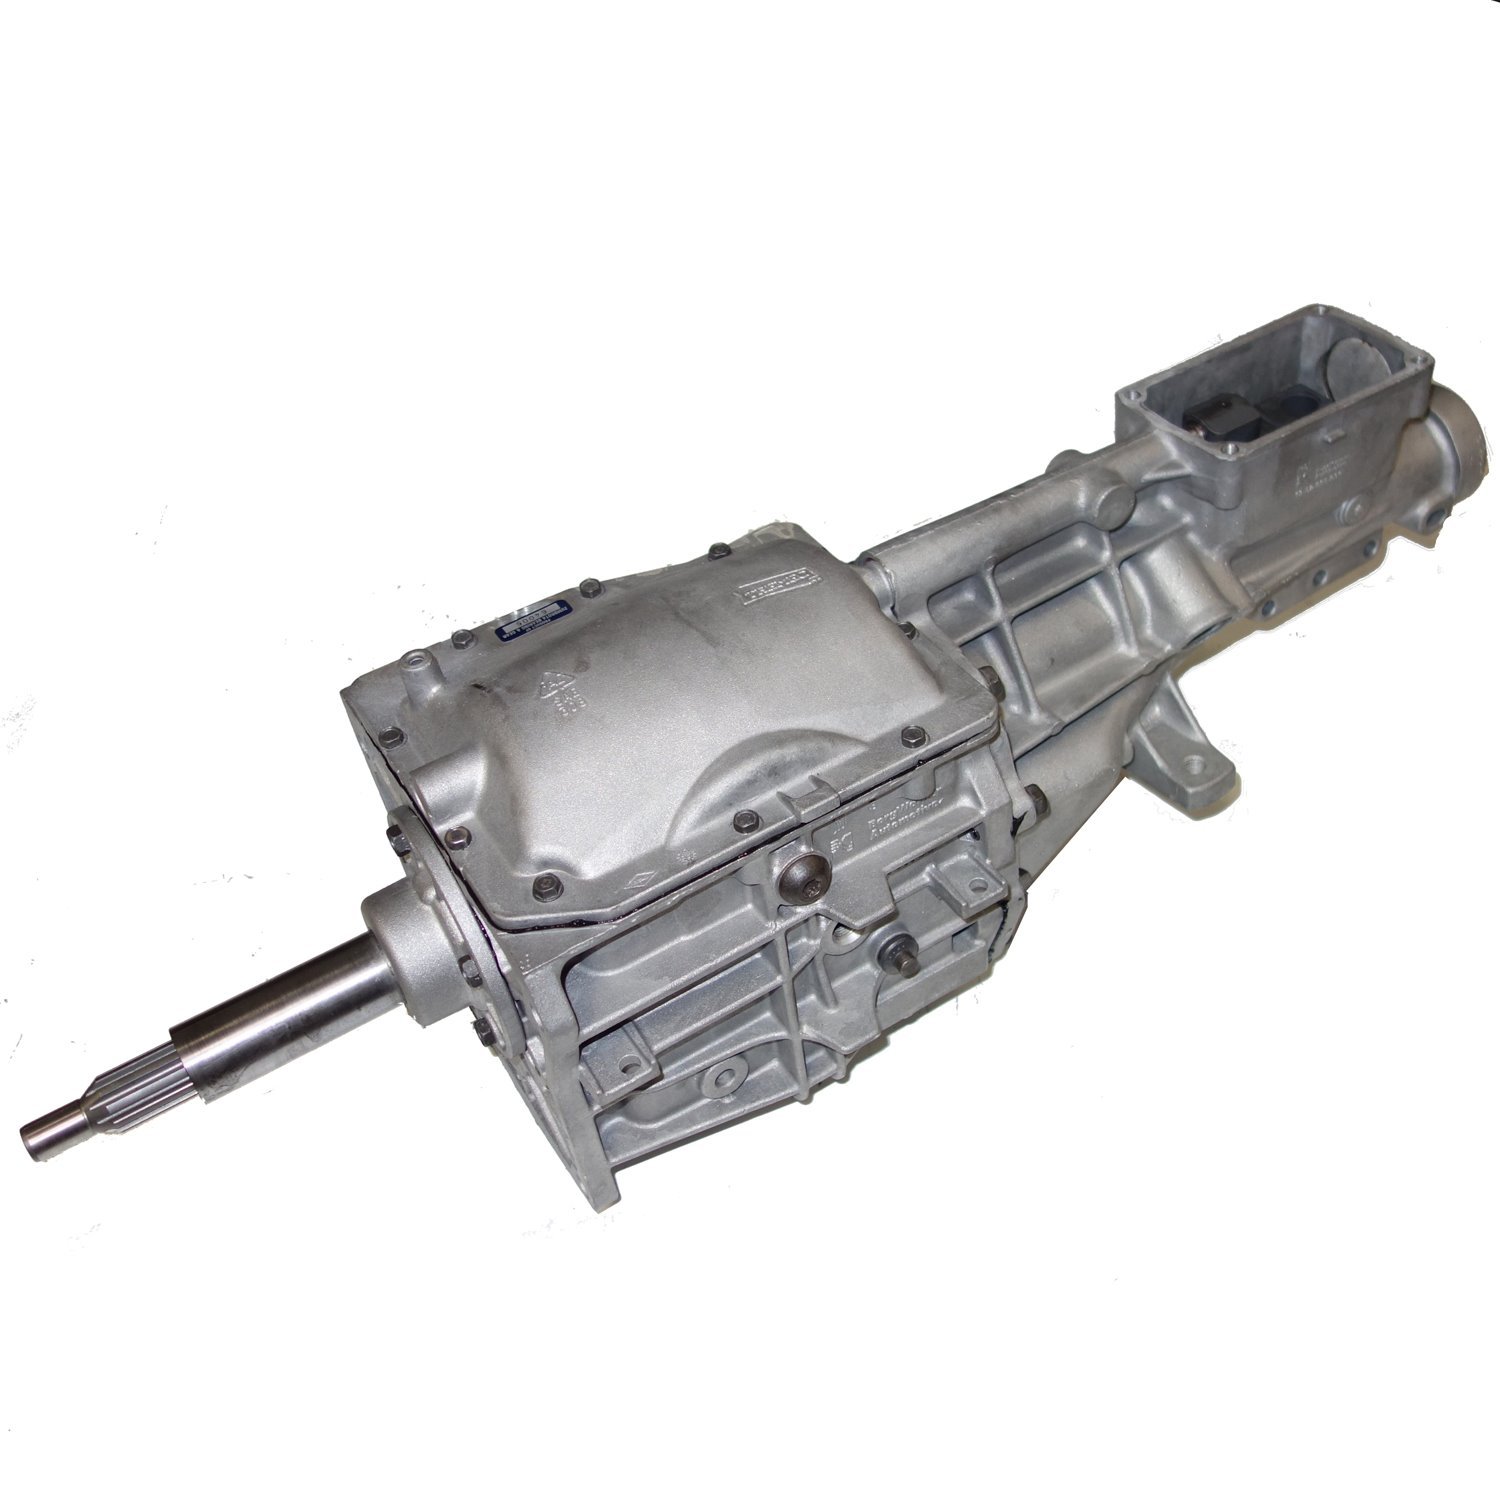 Remanufactured T5 Manual Transmission for Ford 94-98 Mustang V6, 5 Speed